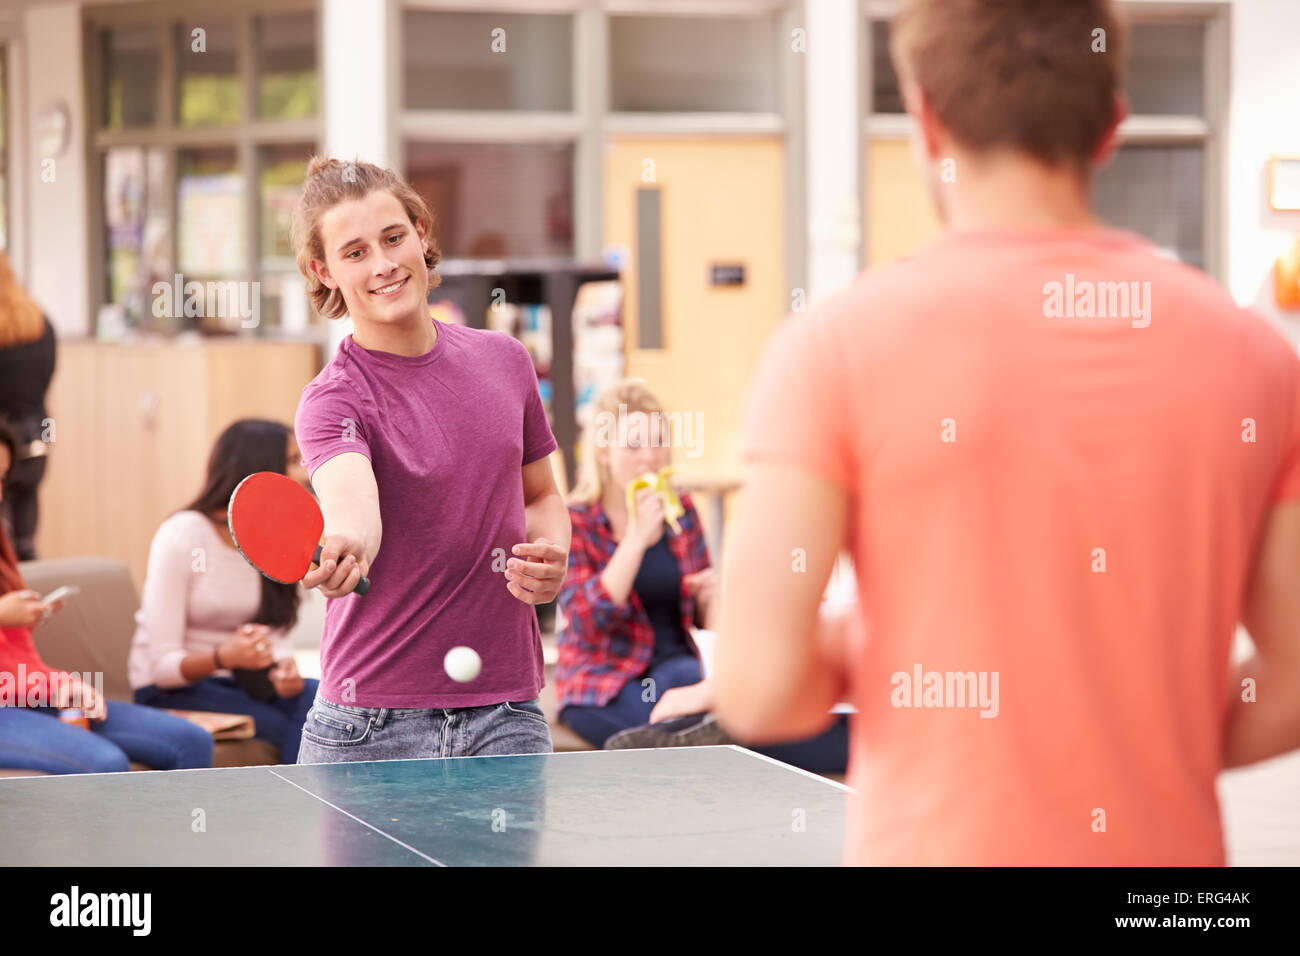 College Students Relaxing And Playing Table Tennis Stock Photo